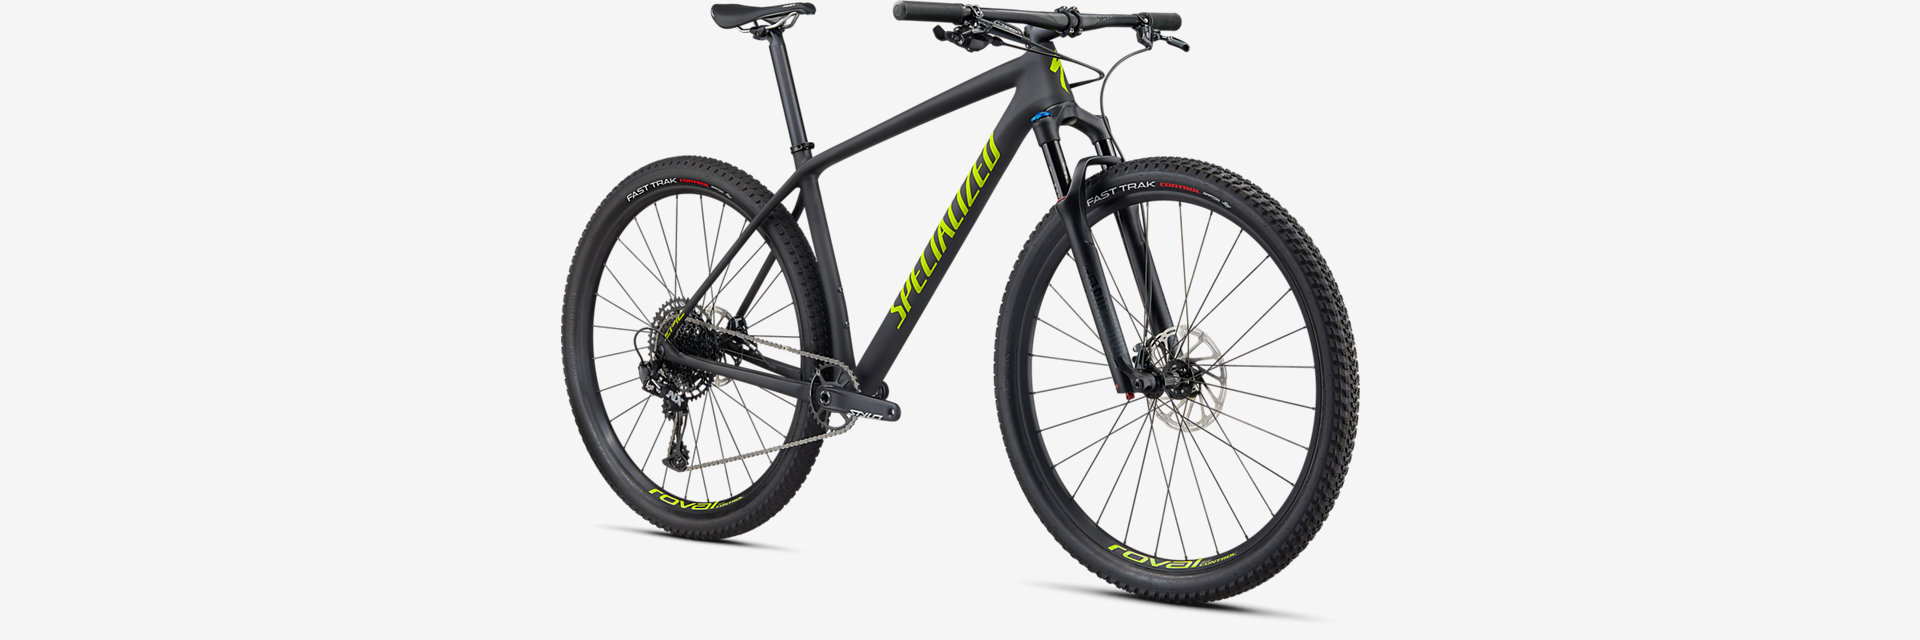 Bicicleta Montaa Specialized Crosscountry Epic Comp2020 1.jpg